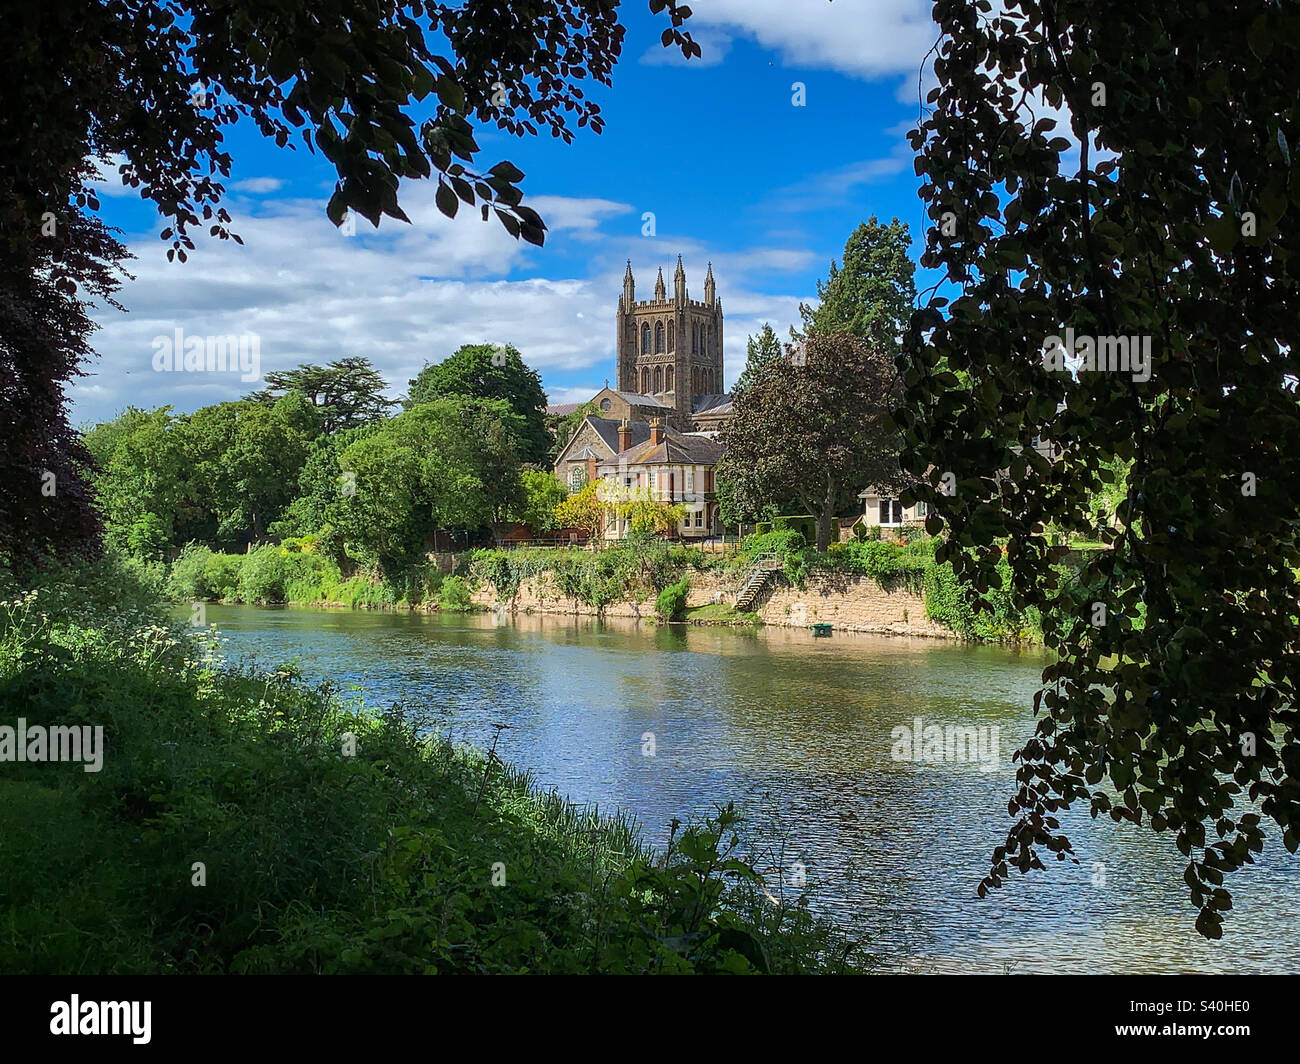 Looking across the River Wye to Hereford Cathedral on a beautiful spring day in Hereford, Herefordshire Stock Photo